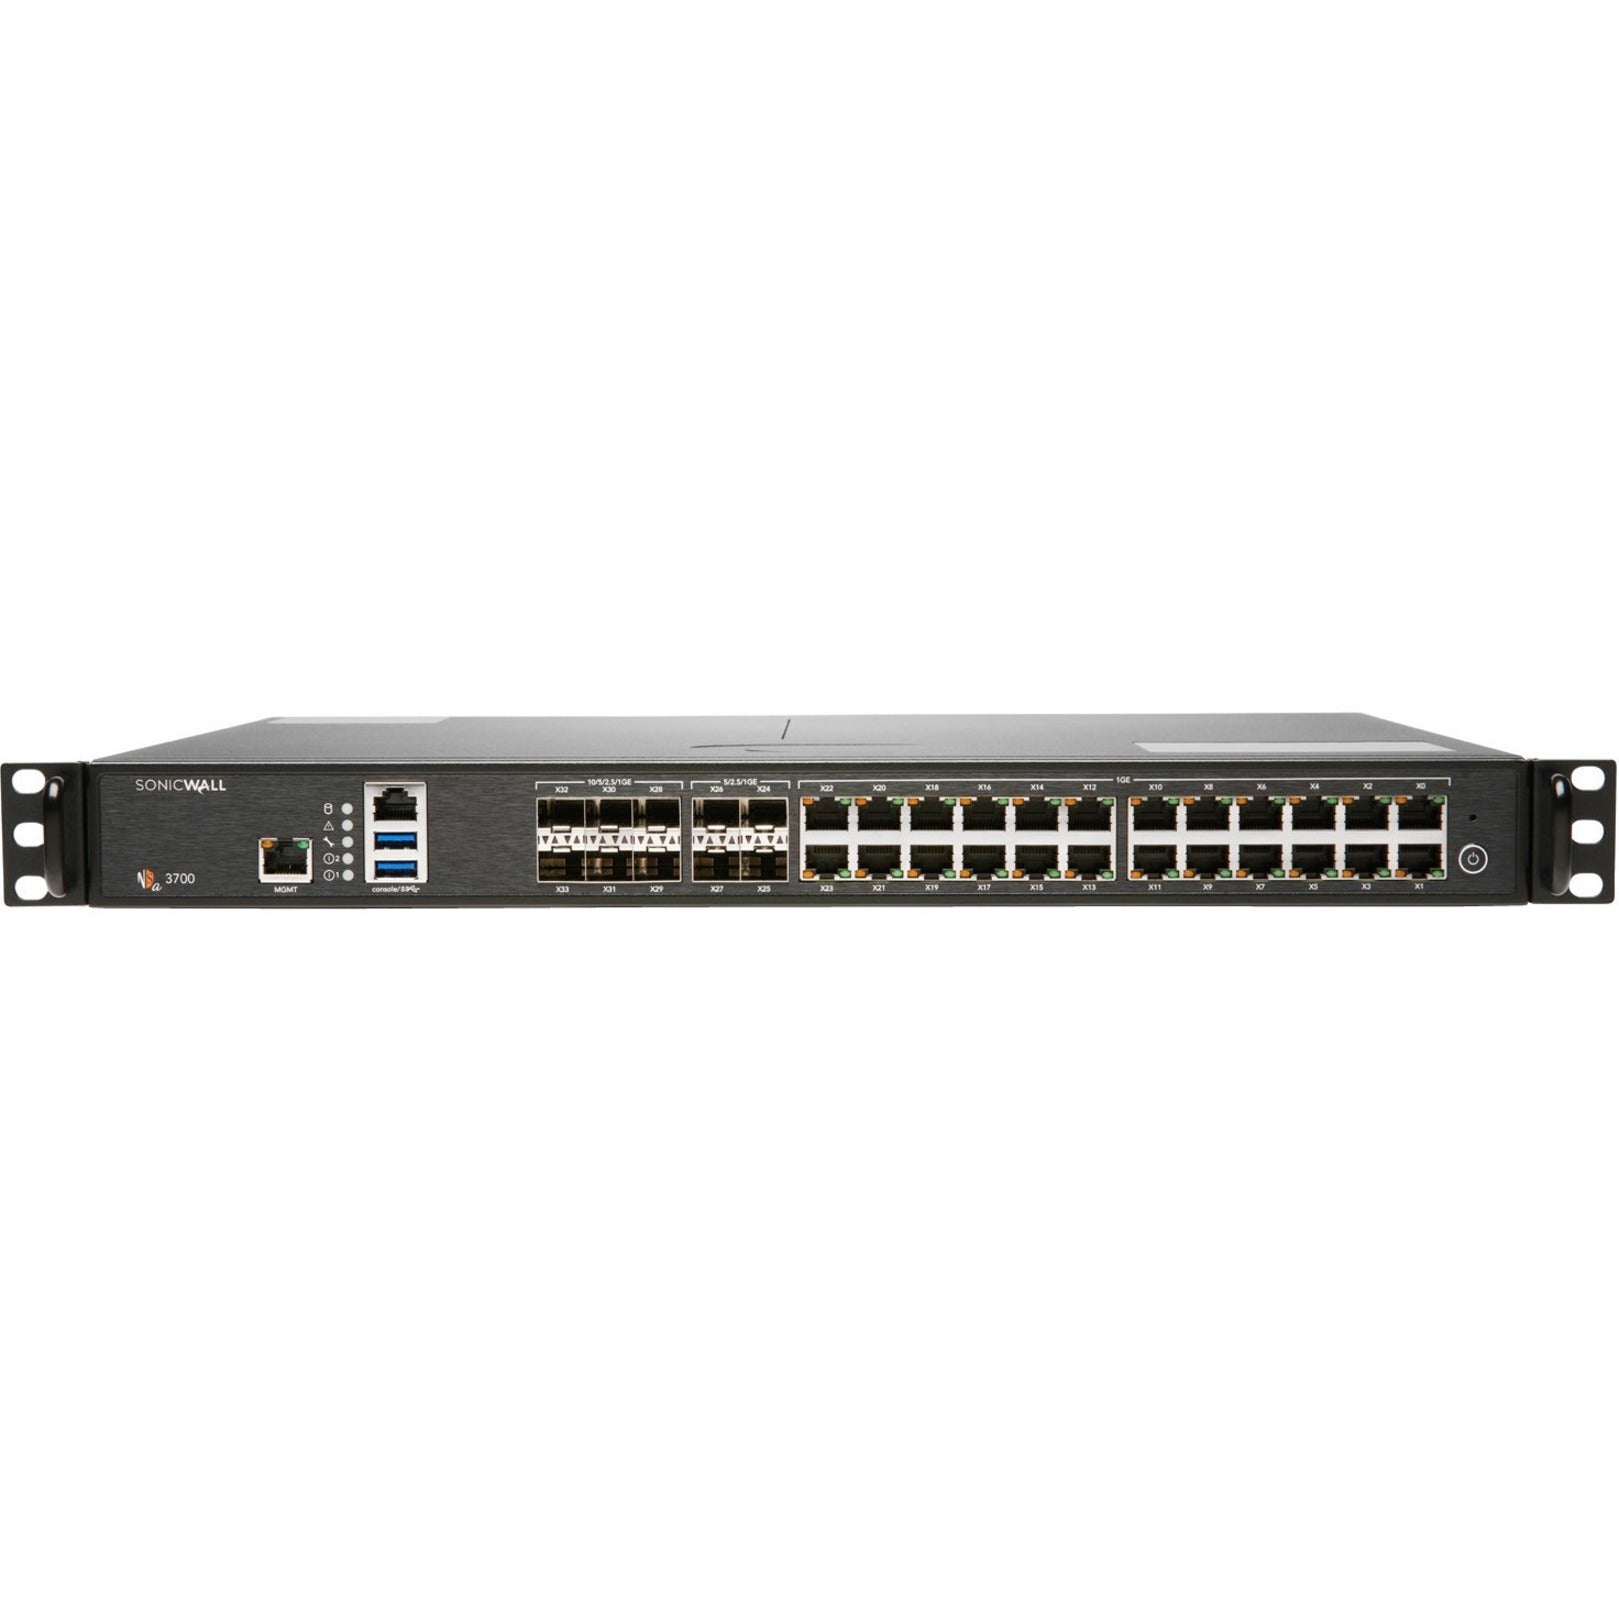 SonicWall 02-SSC-8718 NSA 3700 Network Security/Firewall Appliance, 24 Ports, TotalSecure Advanced Edition